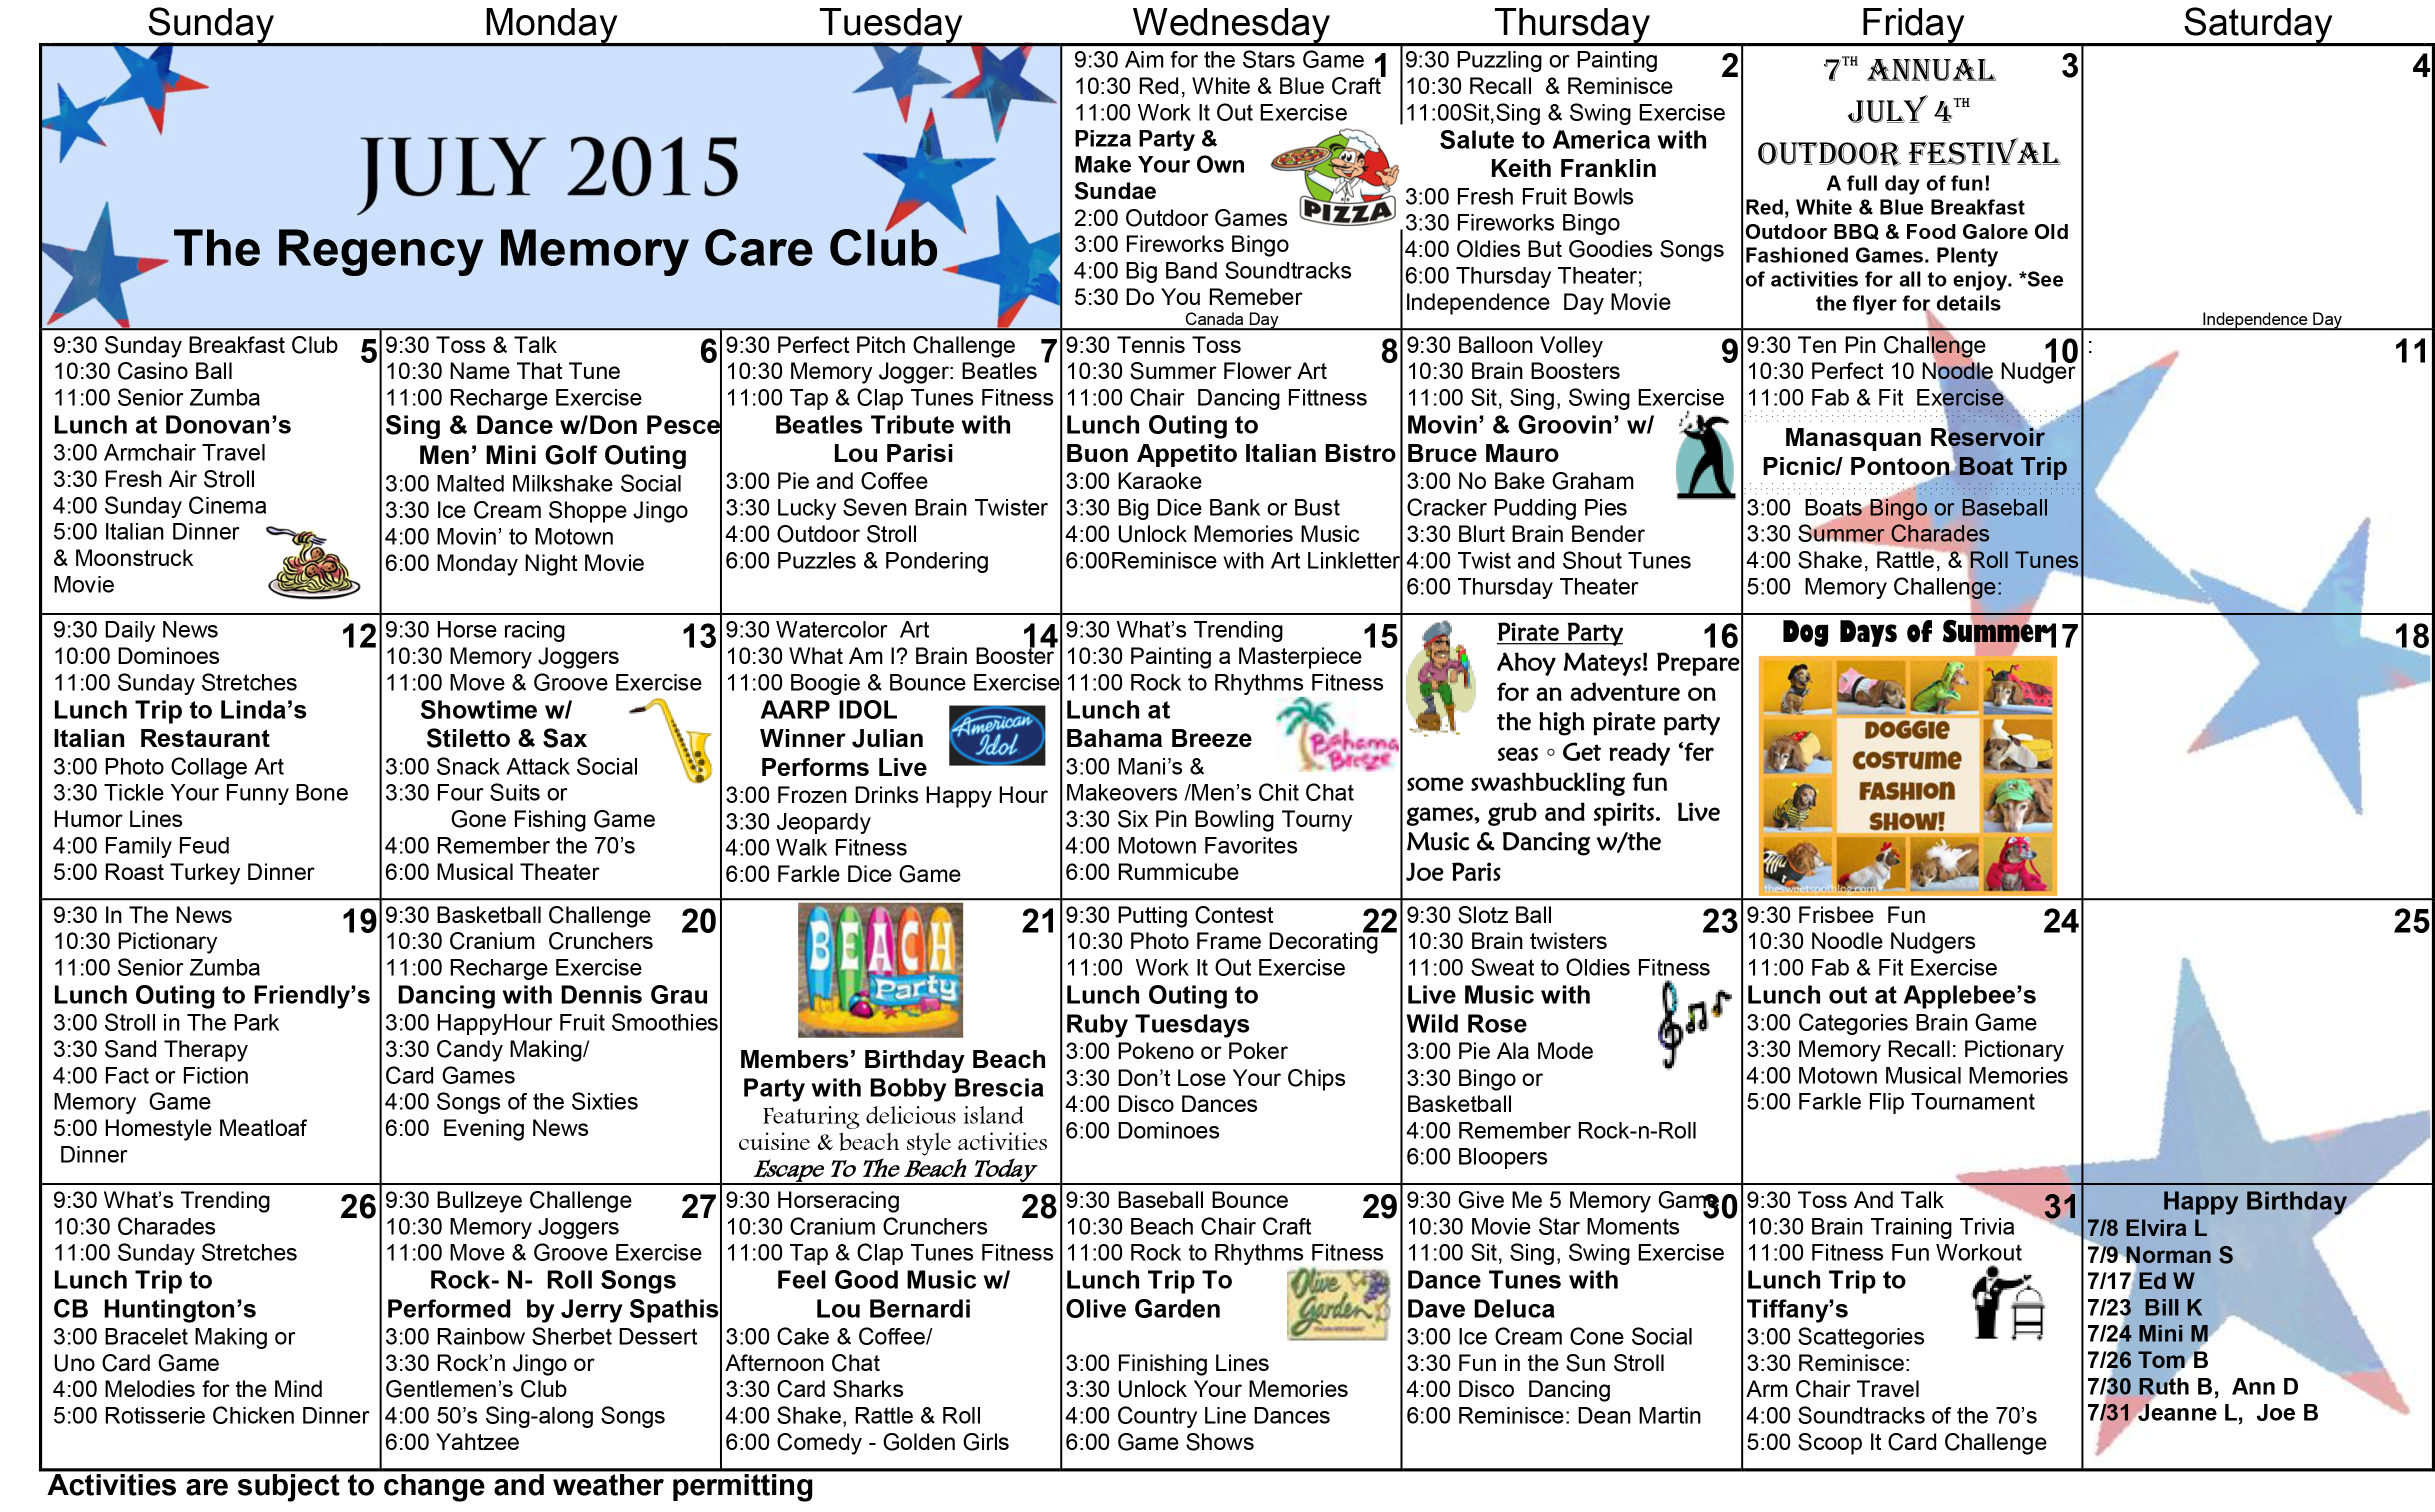 July 2015 Calendar of Events